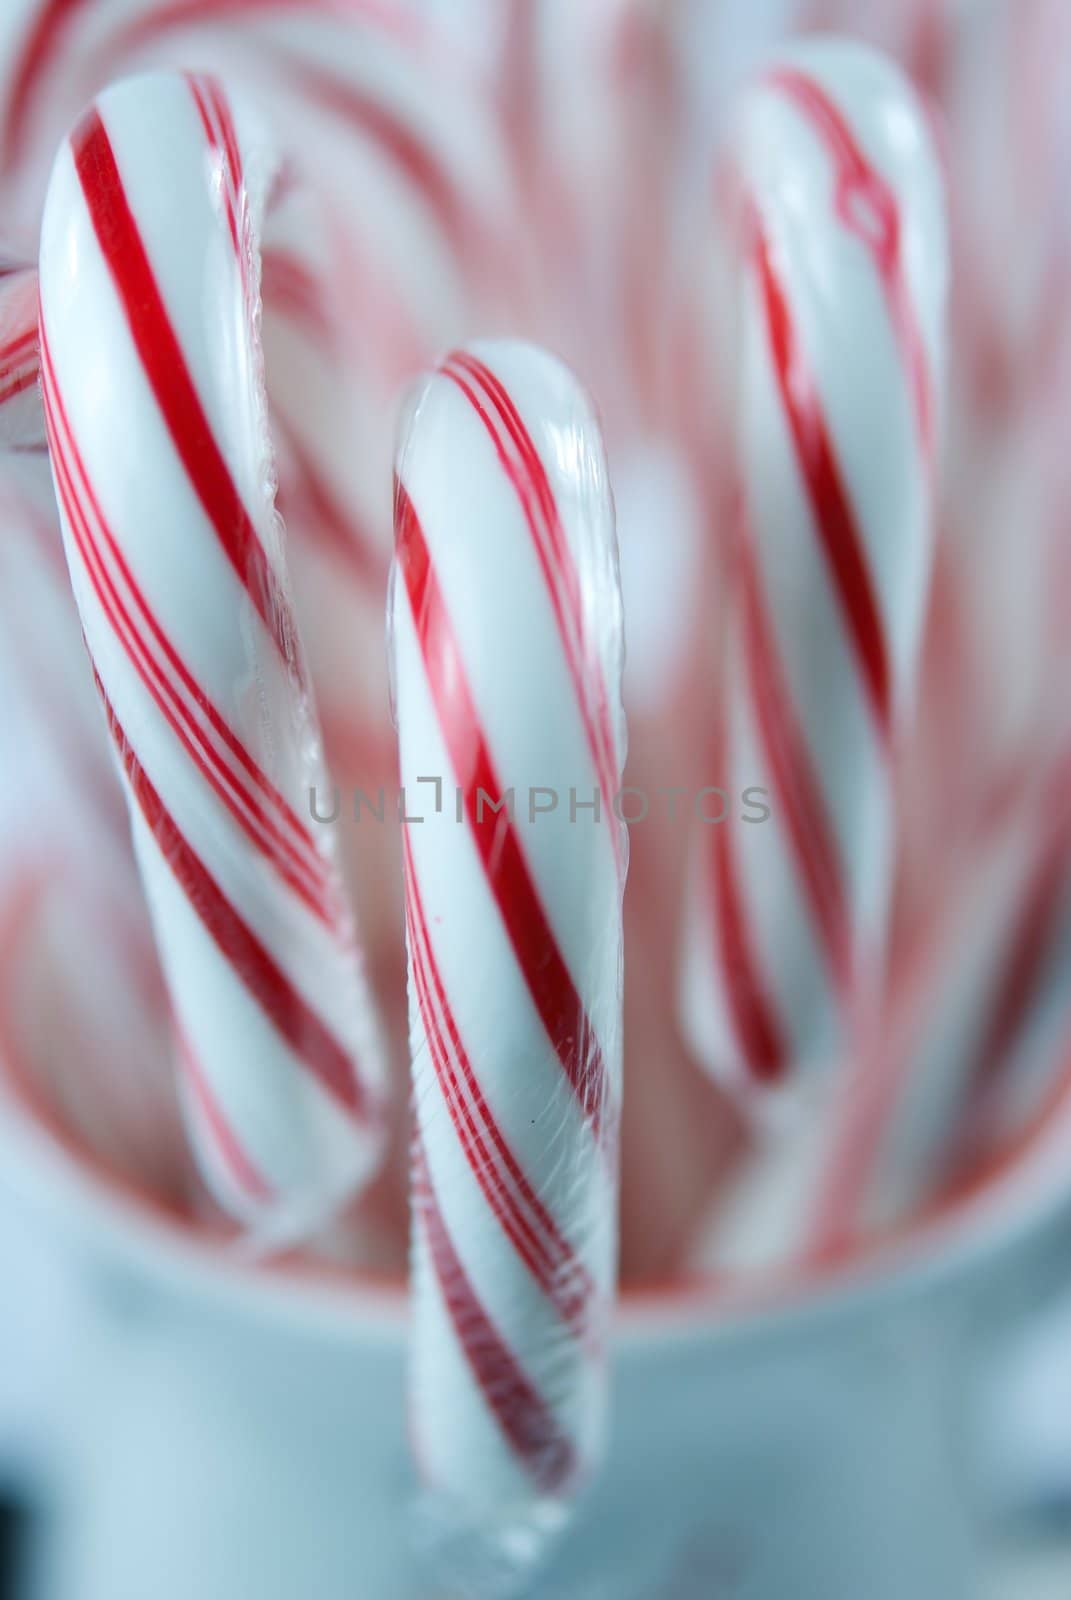 A Mug Holding Three Candy Canes with Red Stripes